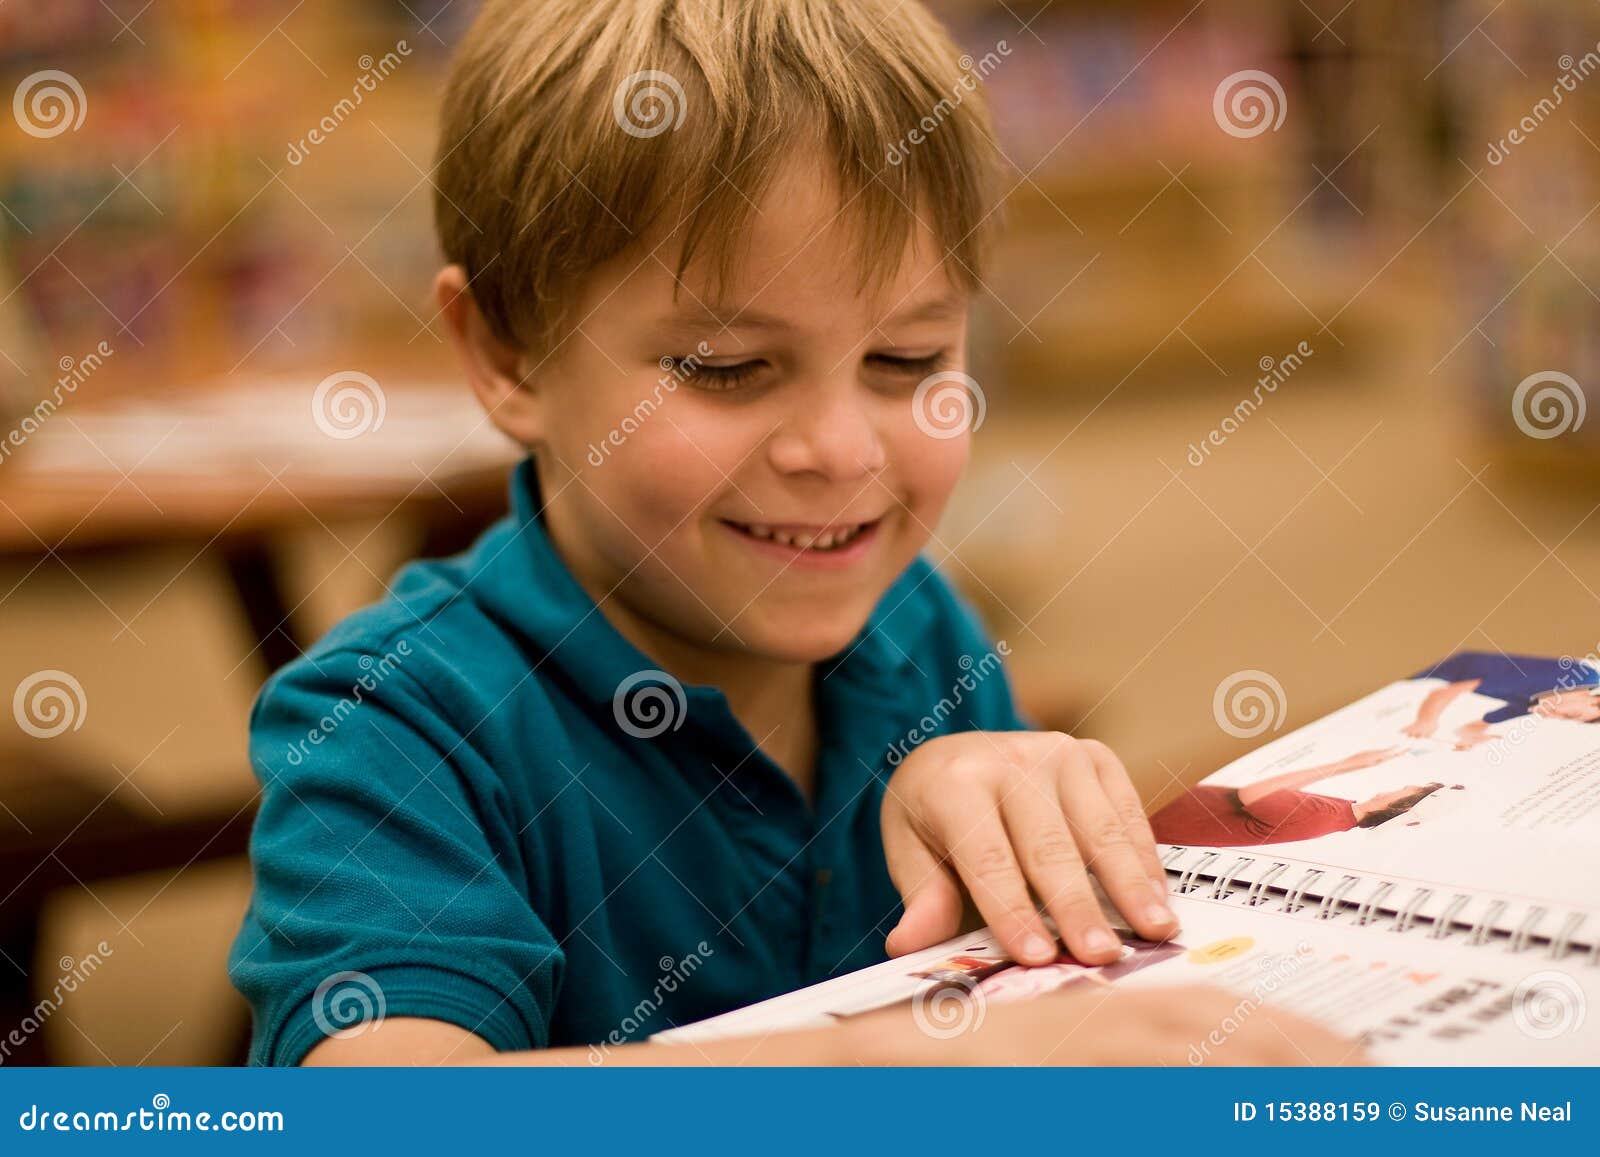 smiling boy reads a book at libary